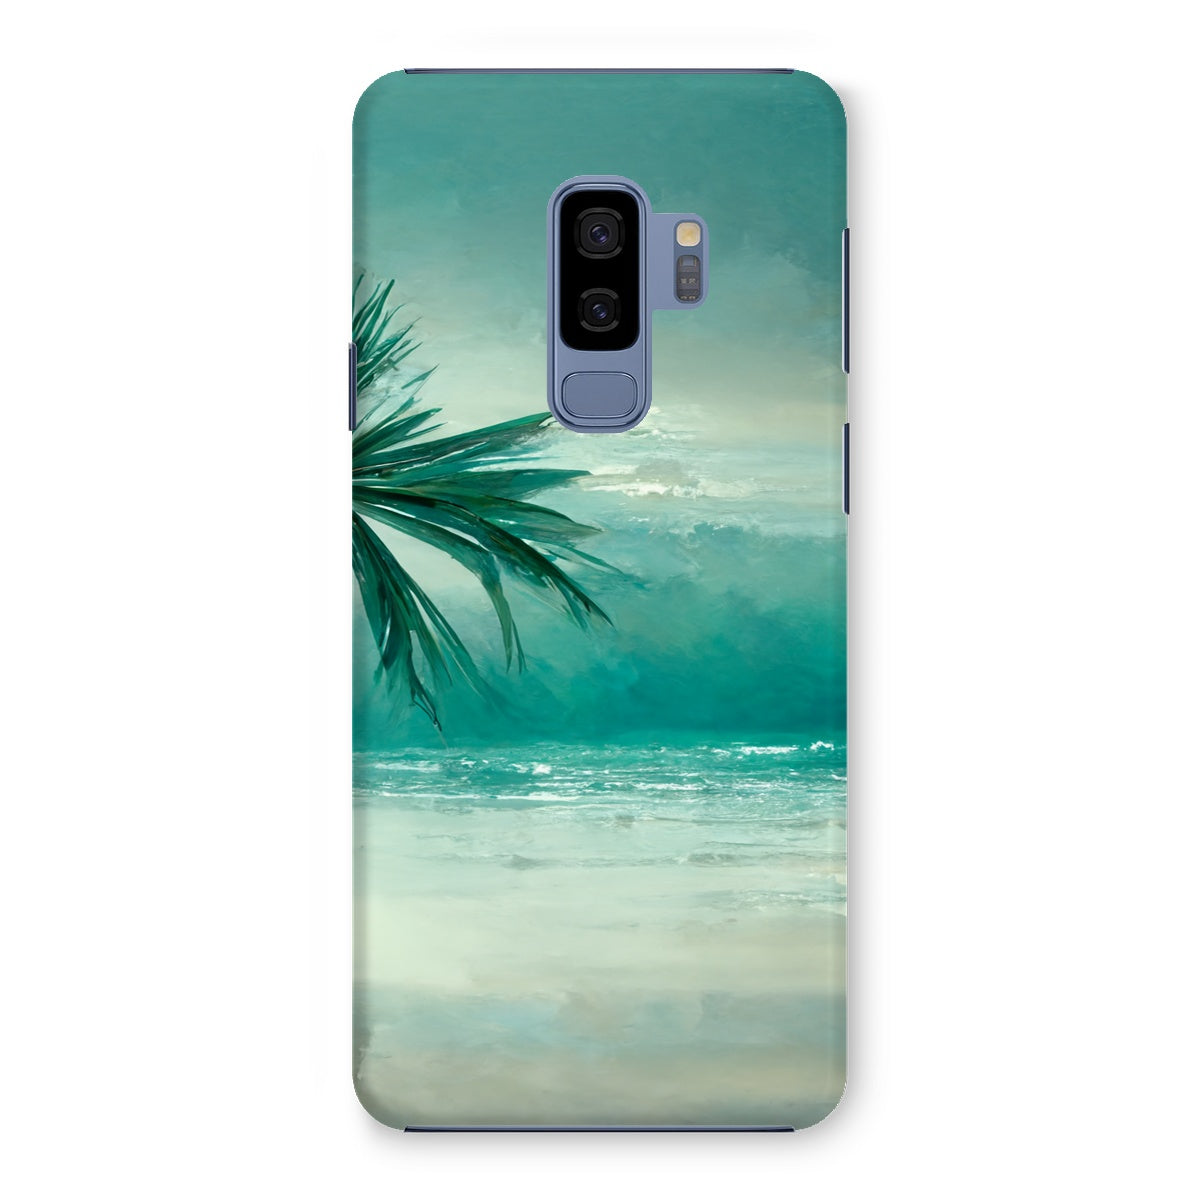 Lonesome Palm Snap Phone Case